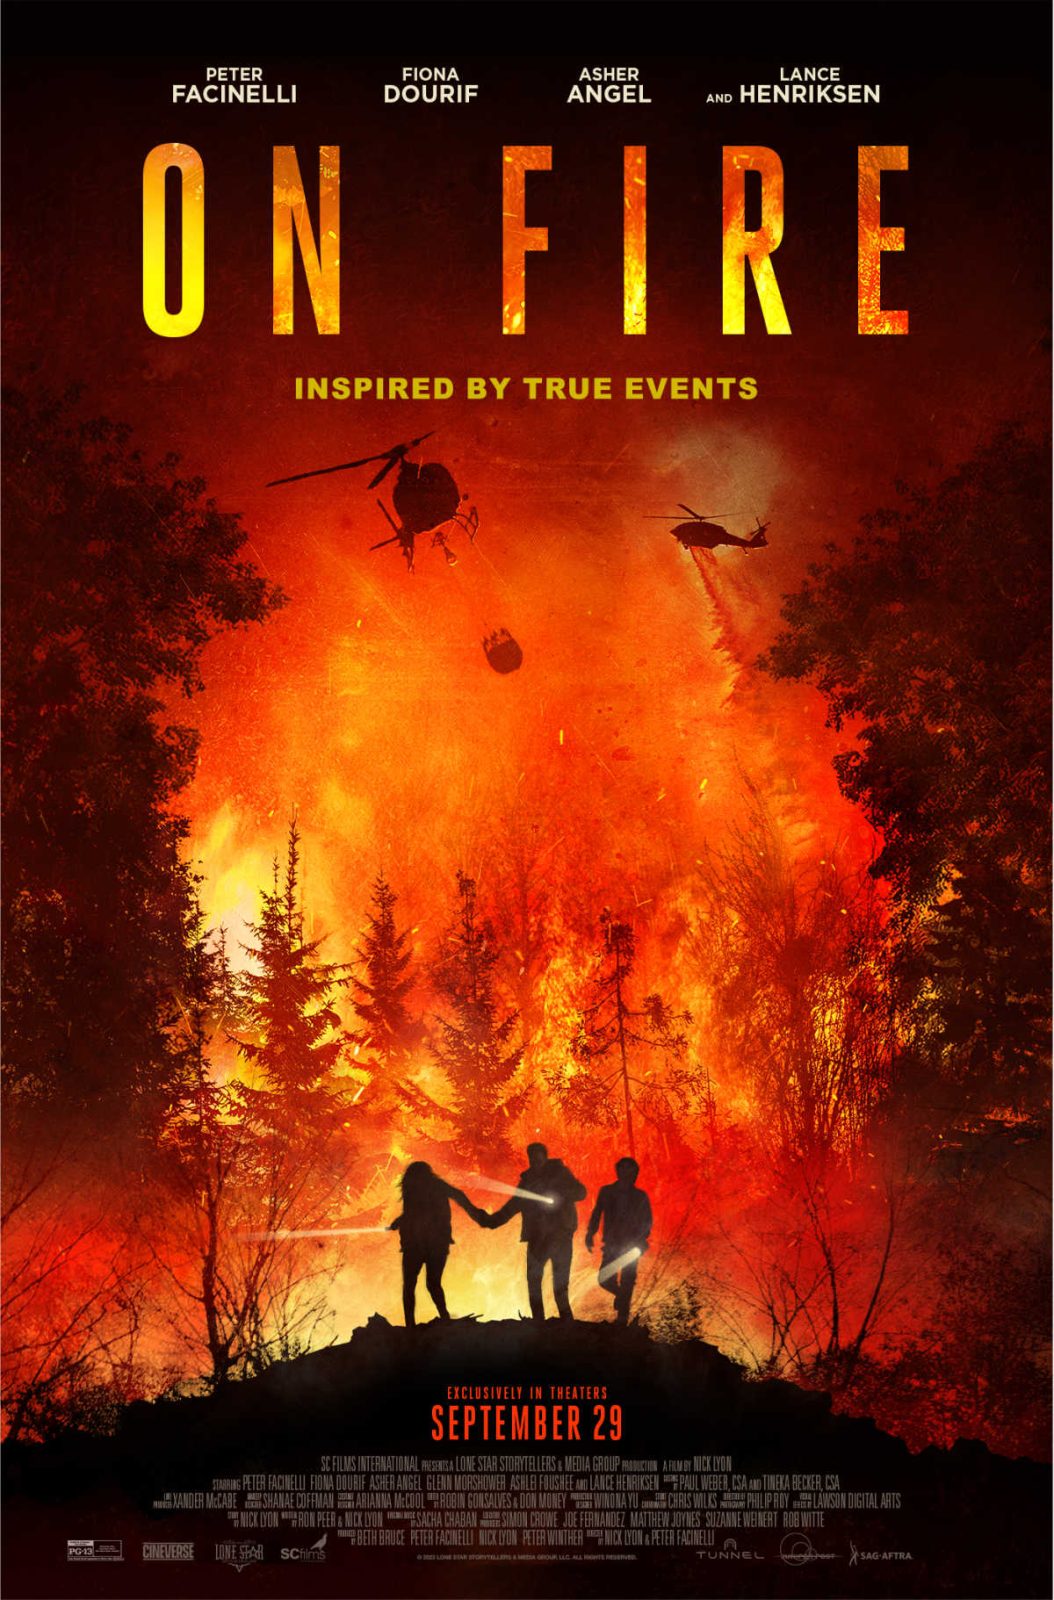 On Fire, a suspenseful wildfire survival drama movie inspired by a true story, opens in theaters on September 29th.